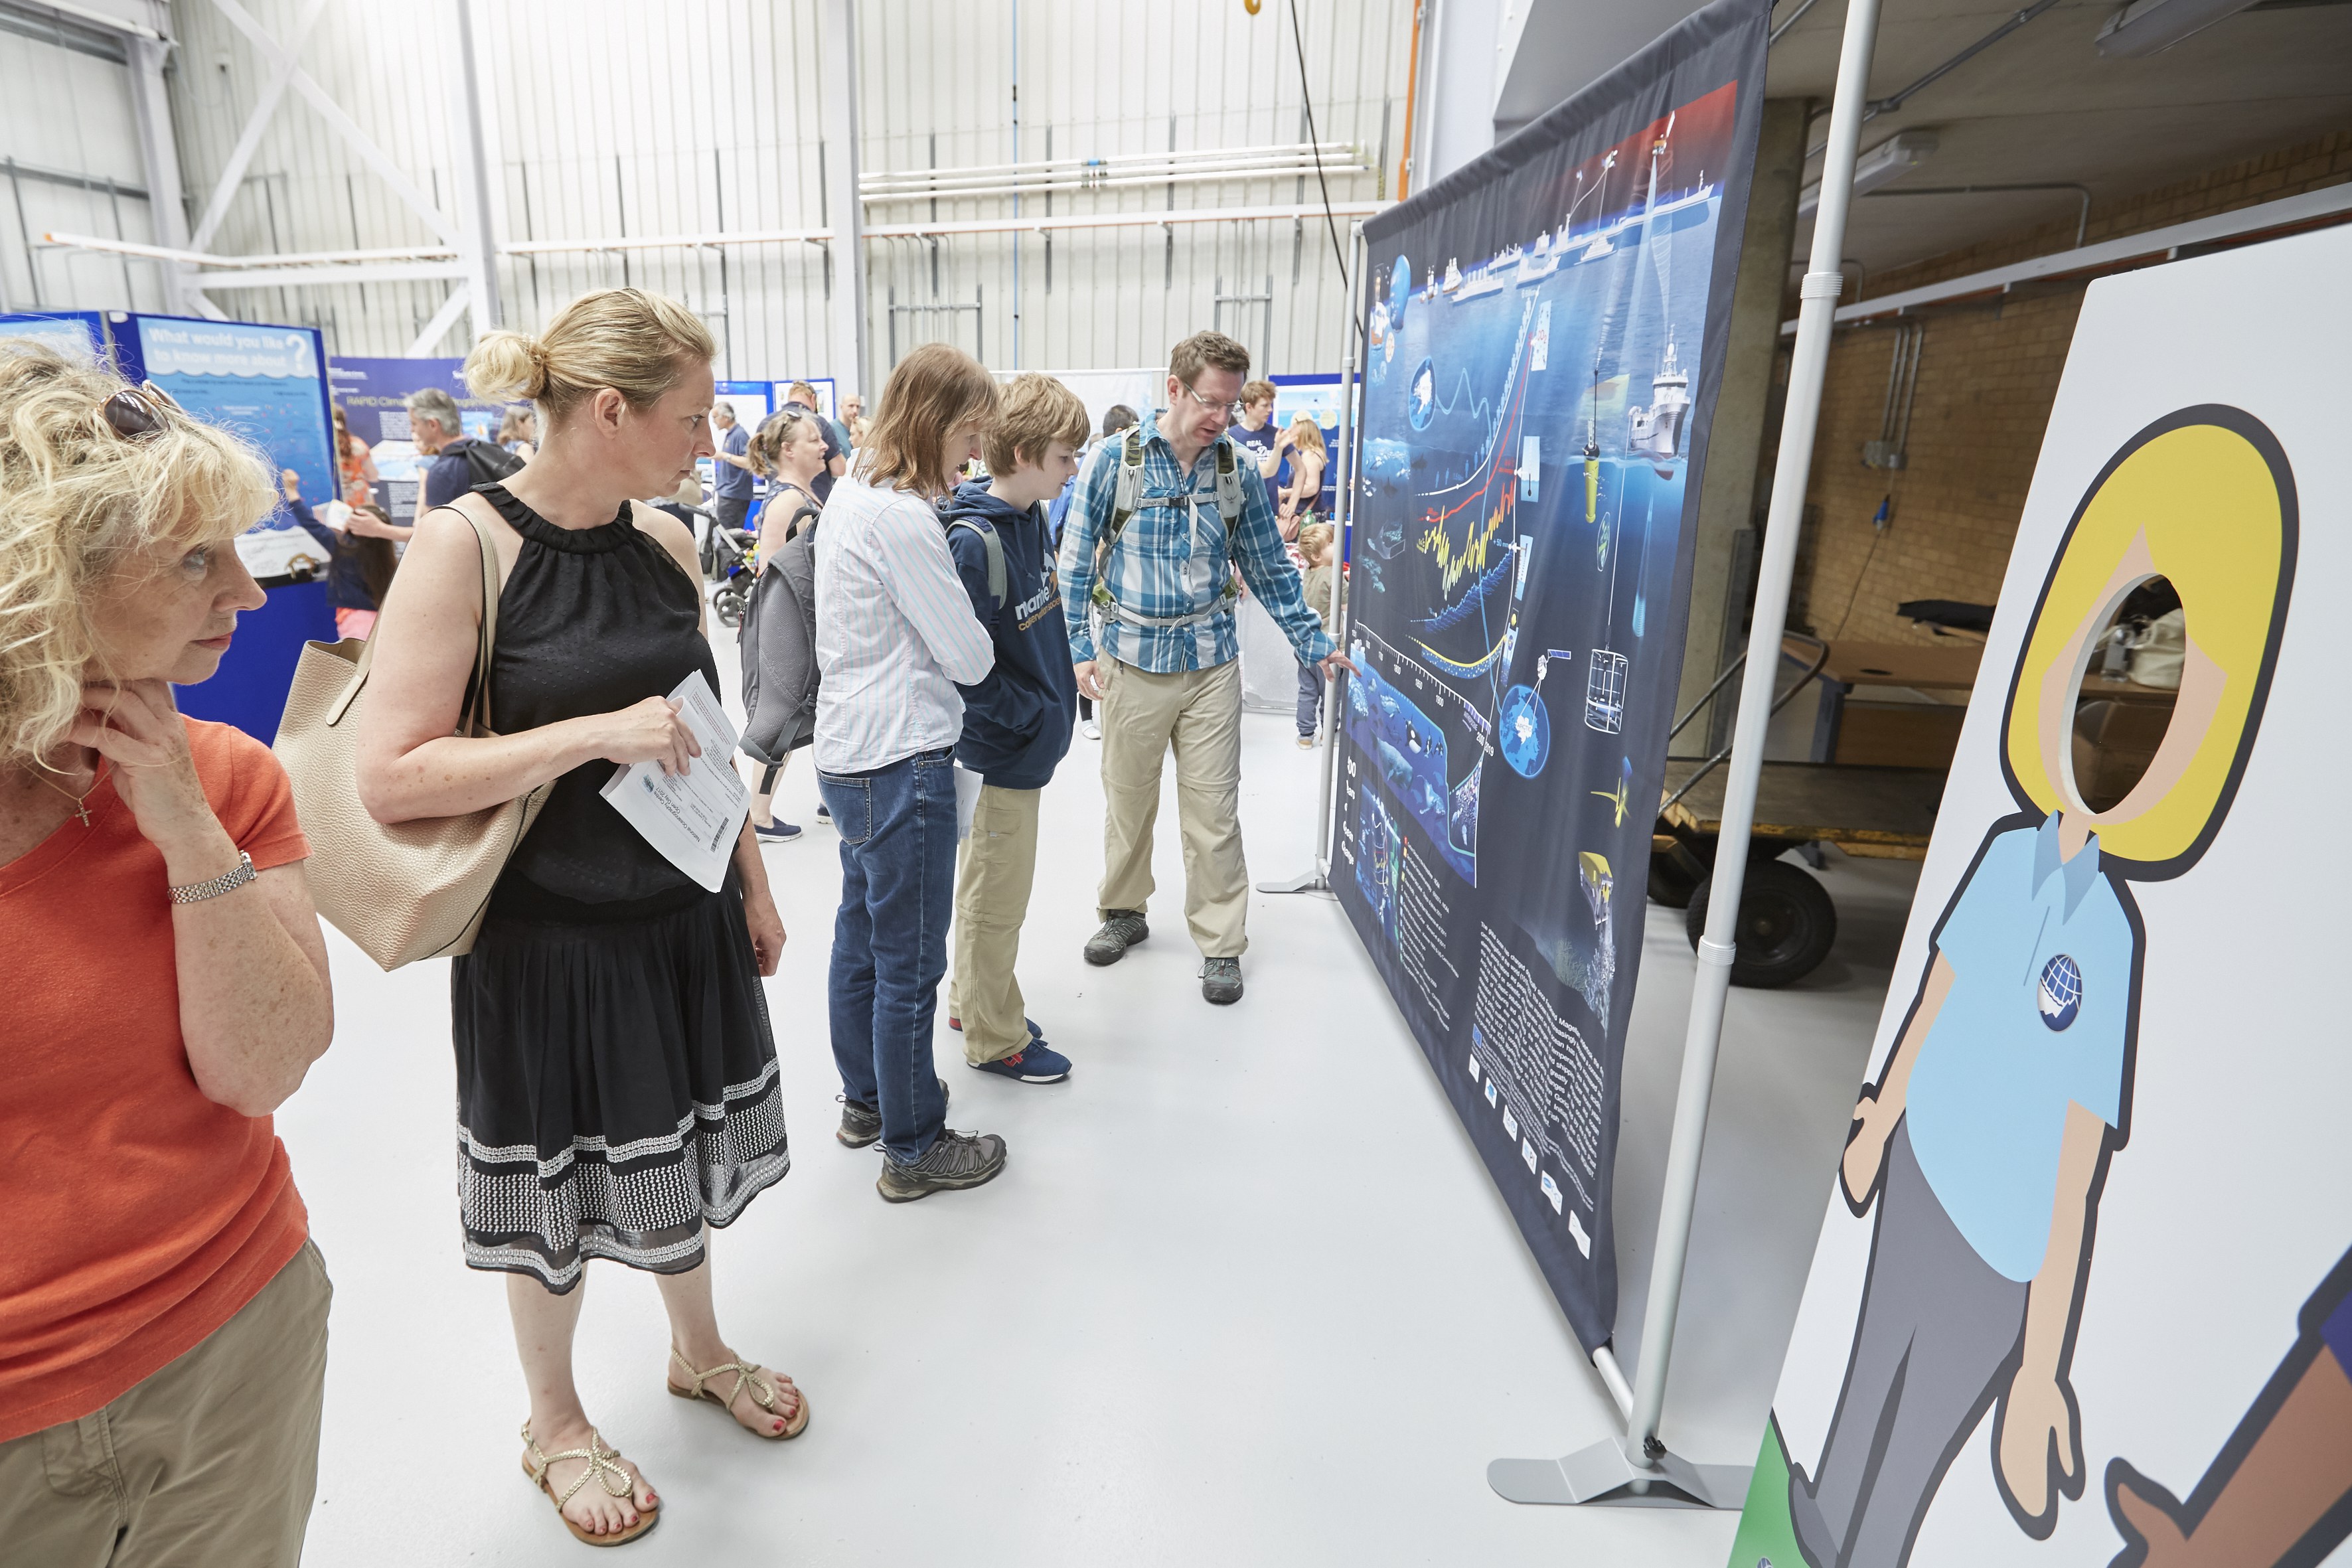 The “500 years of Ocean change” infographic on display at the National Oceanography Centre in Southampton, 3 June 2017. Photo courtesy of the National Oceanography Centre. 